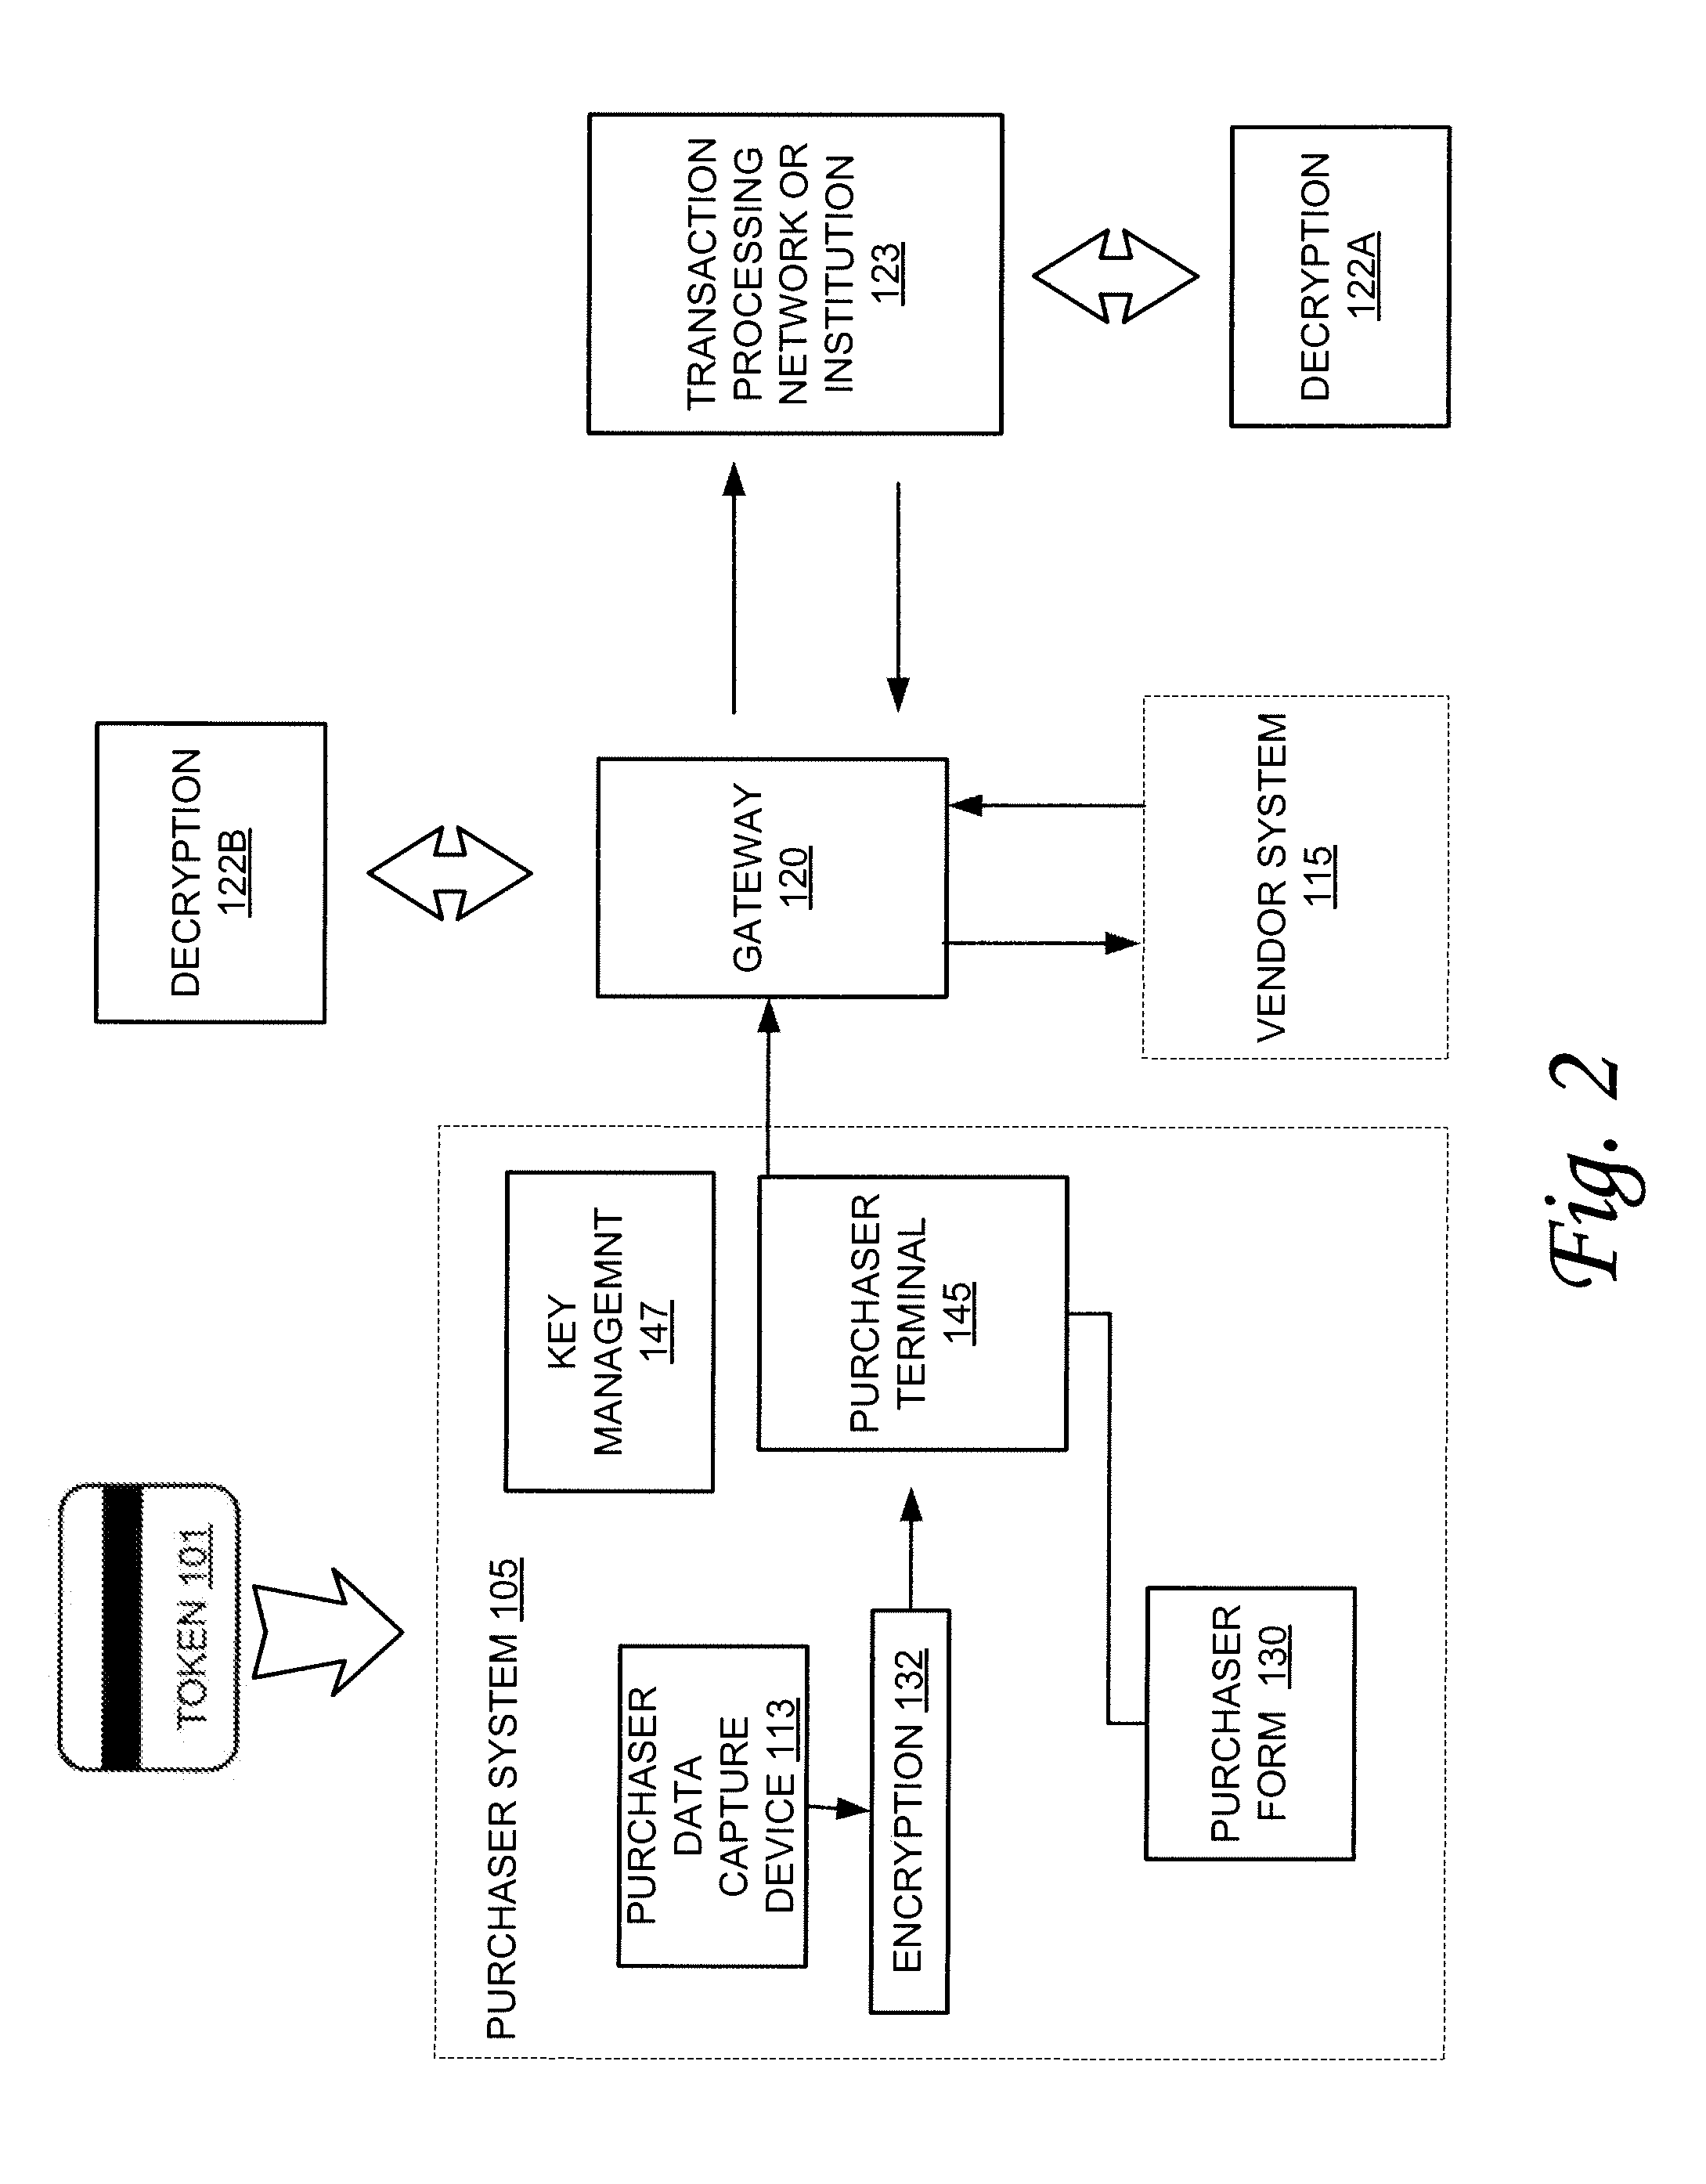 Personal token read system and method